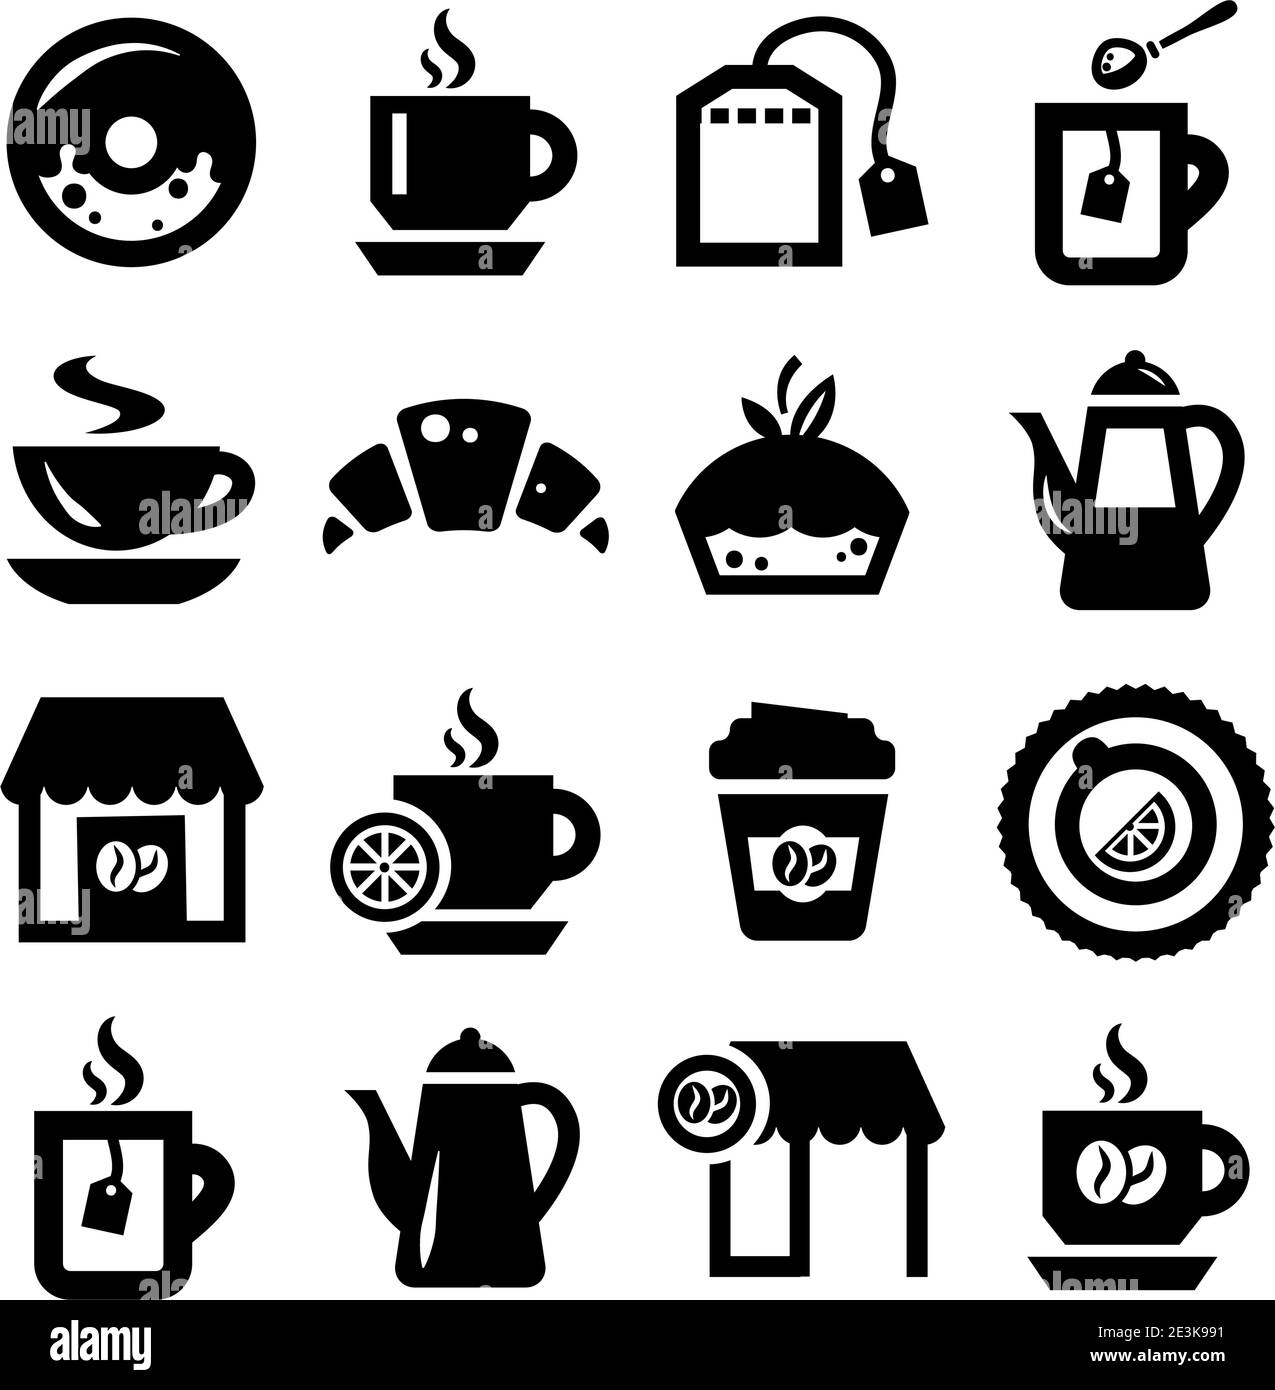 Elegant Coffee And Tea Icons Set Created For Mobile, Web And Applications. Stock Vector